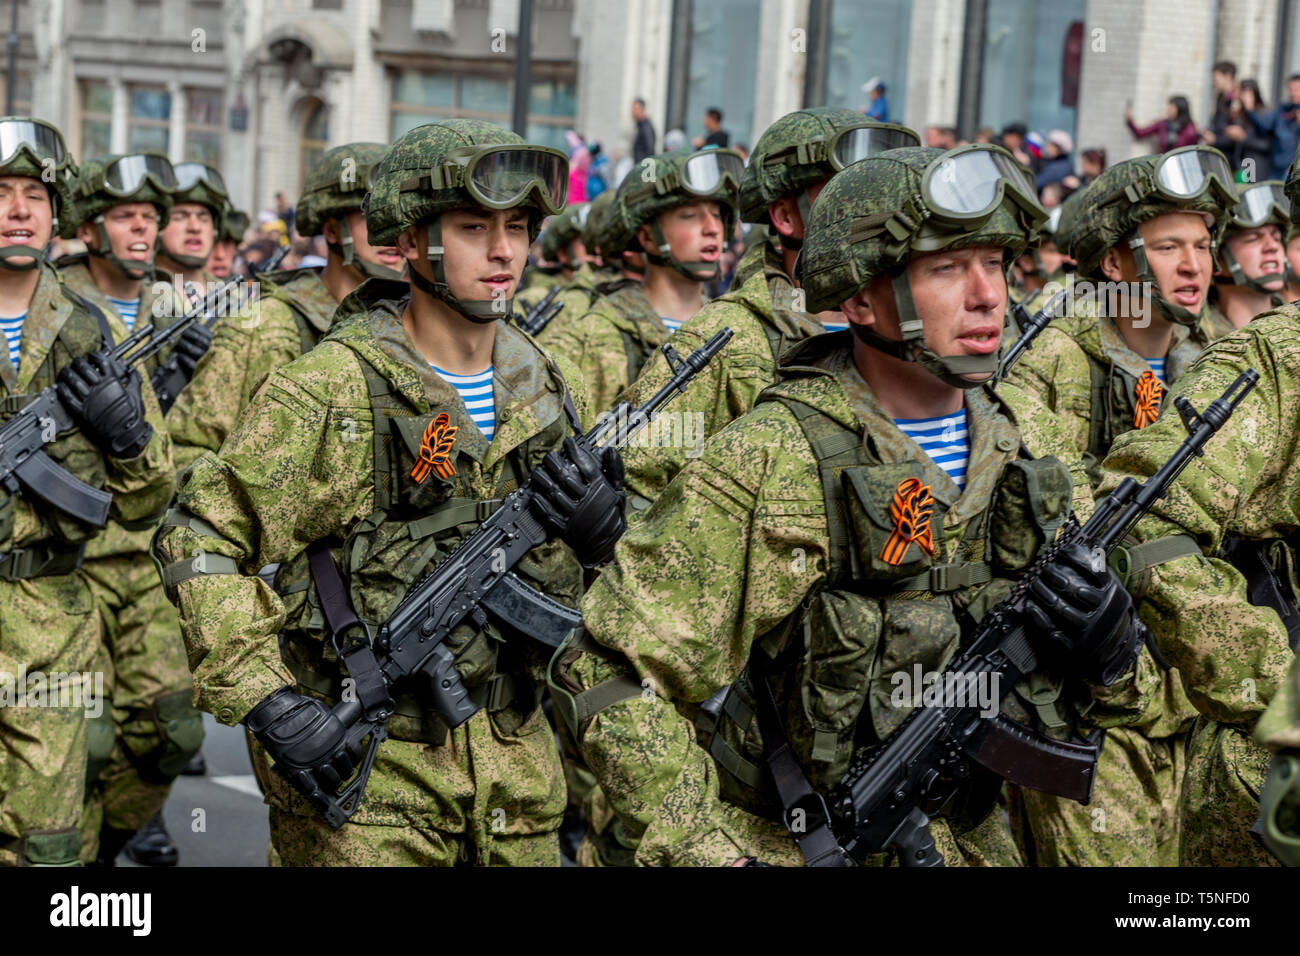 russia-vladivostok-05092018-armed-soldiers-of-special-forces-with-machine-guns-on-parade-on-annual-victory-day-on-may-9-holiday-to-commemorate-v-T5NFD0.jpg